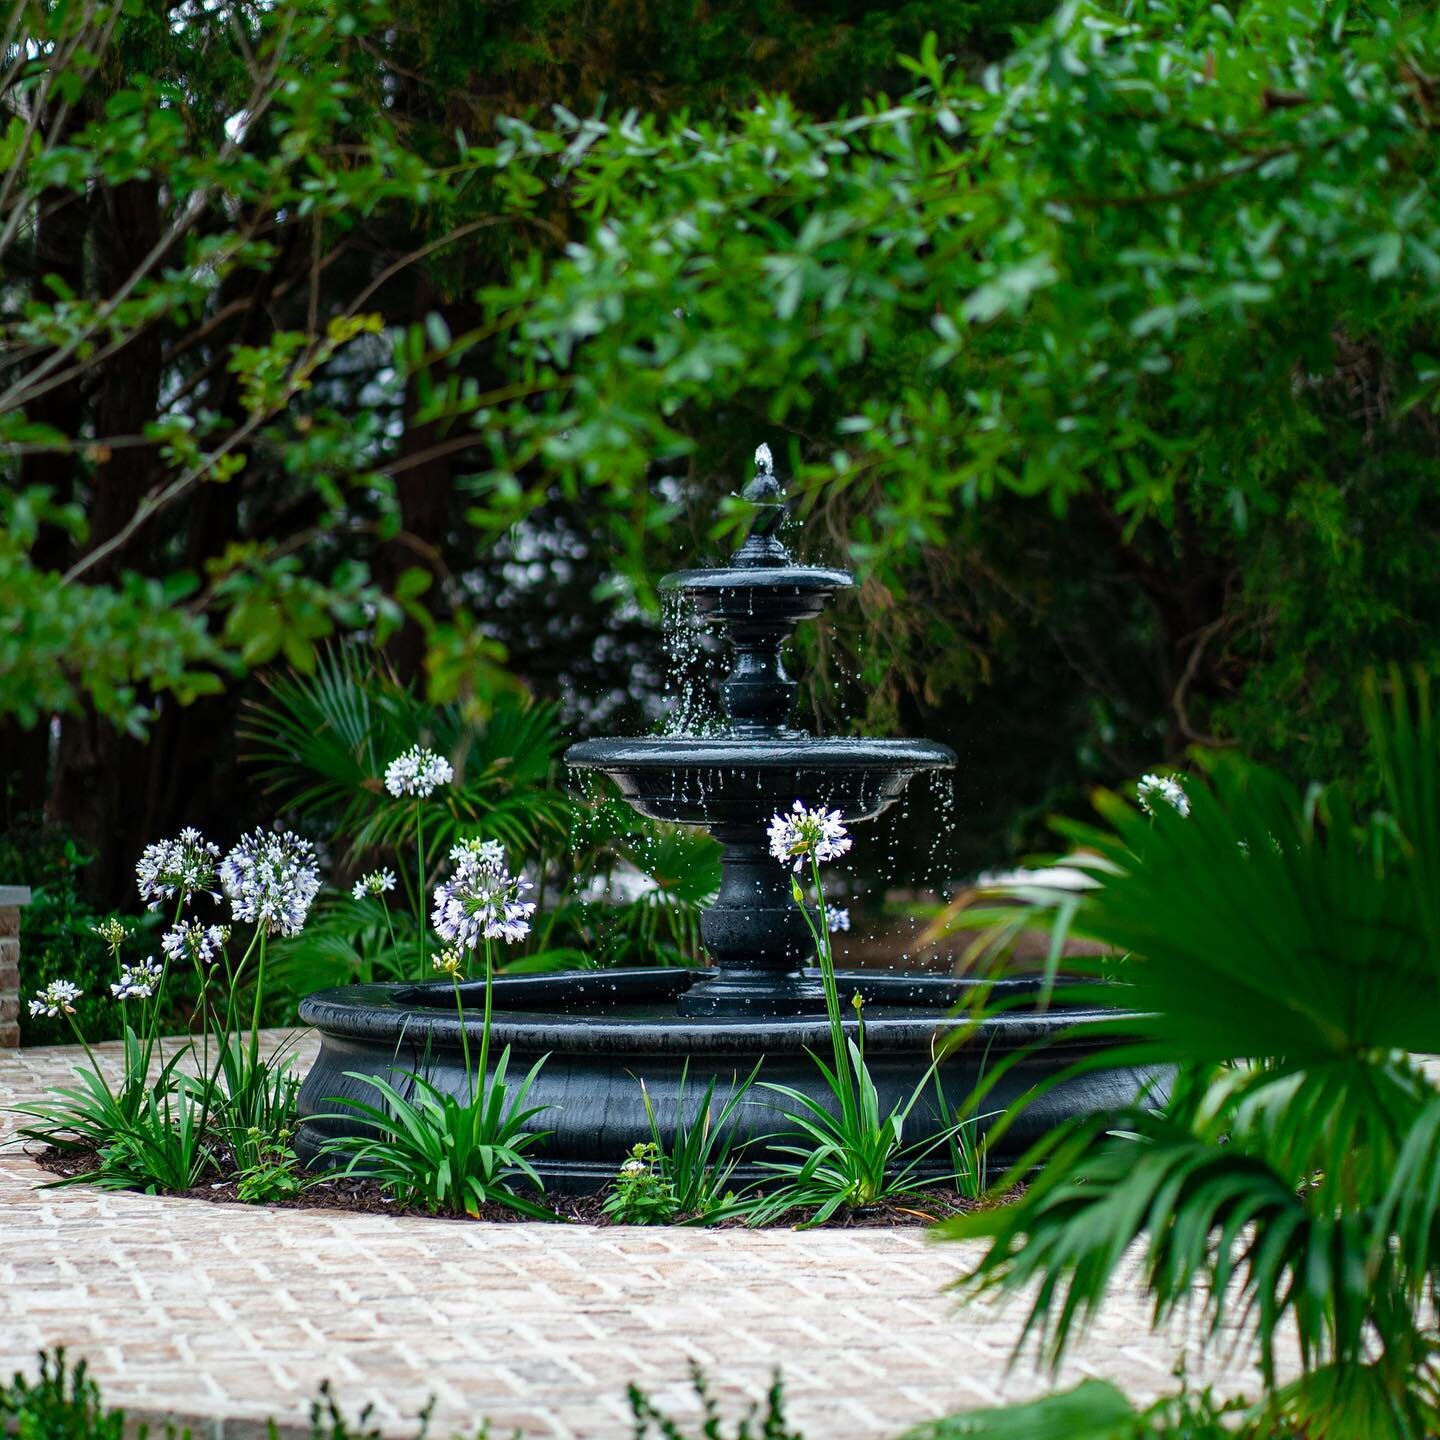 This was a really special project for me.  My client @tgraysoncaprio came to me with an idea to honor her late mother, Ruthie, with a traditional Charleston style garden.  All of the plants selected will flower white and we incorporated some of Ruthi